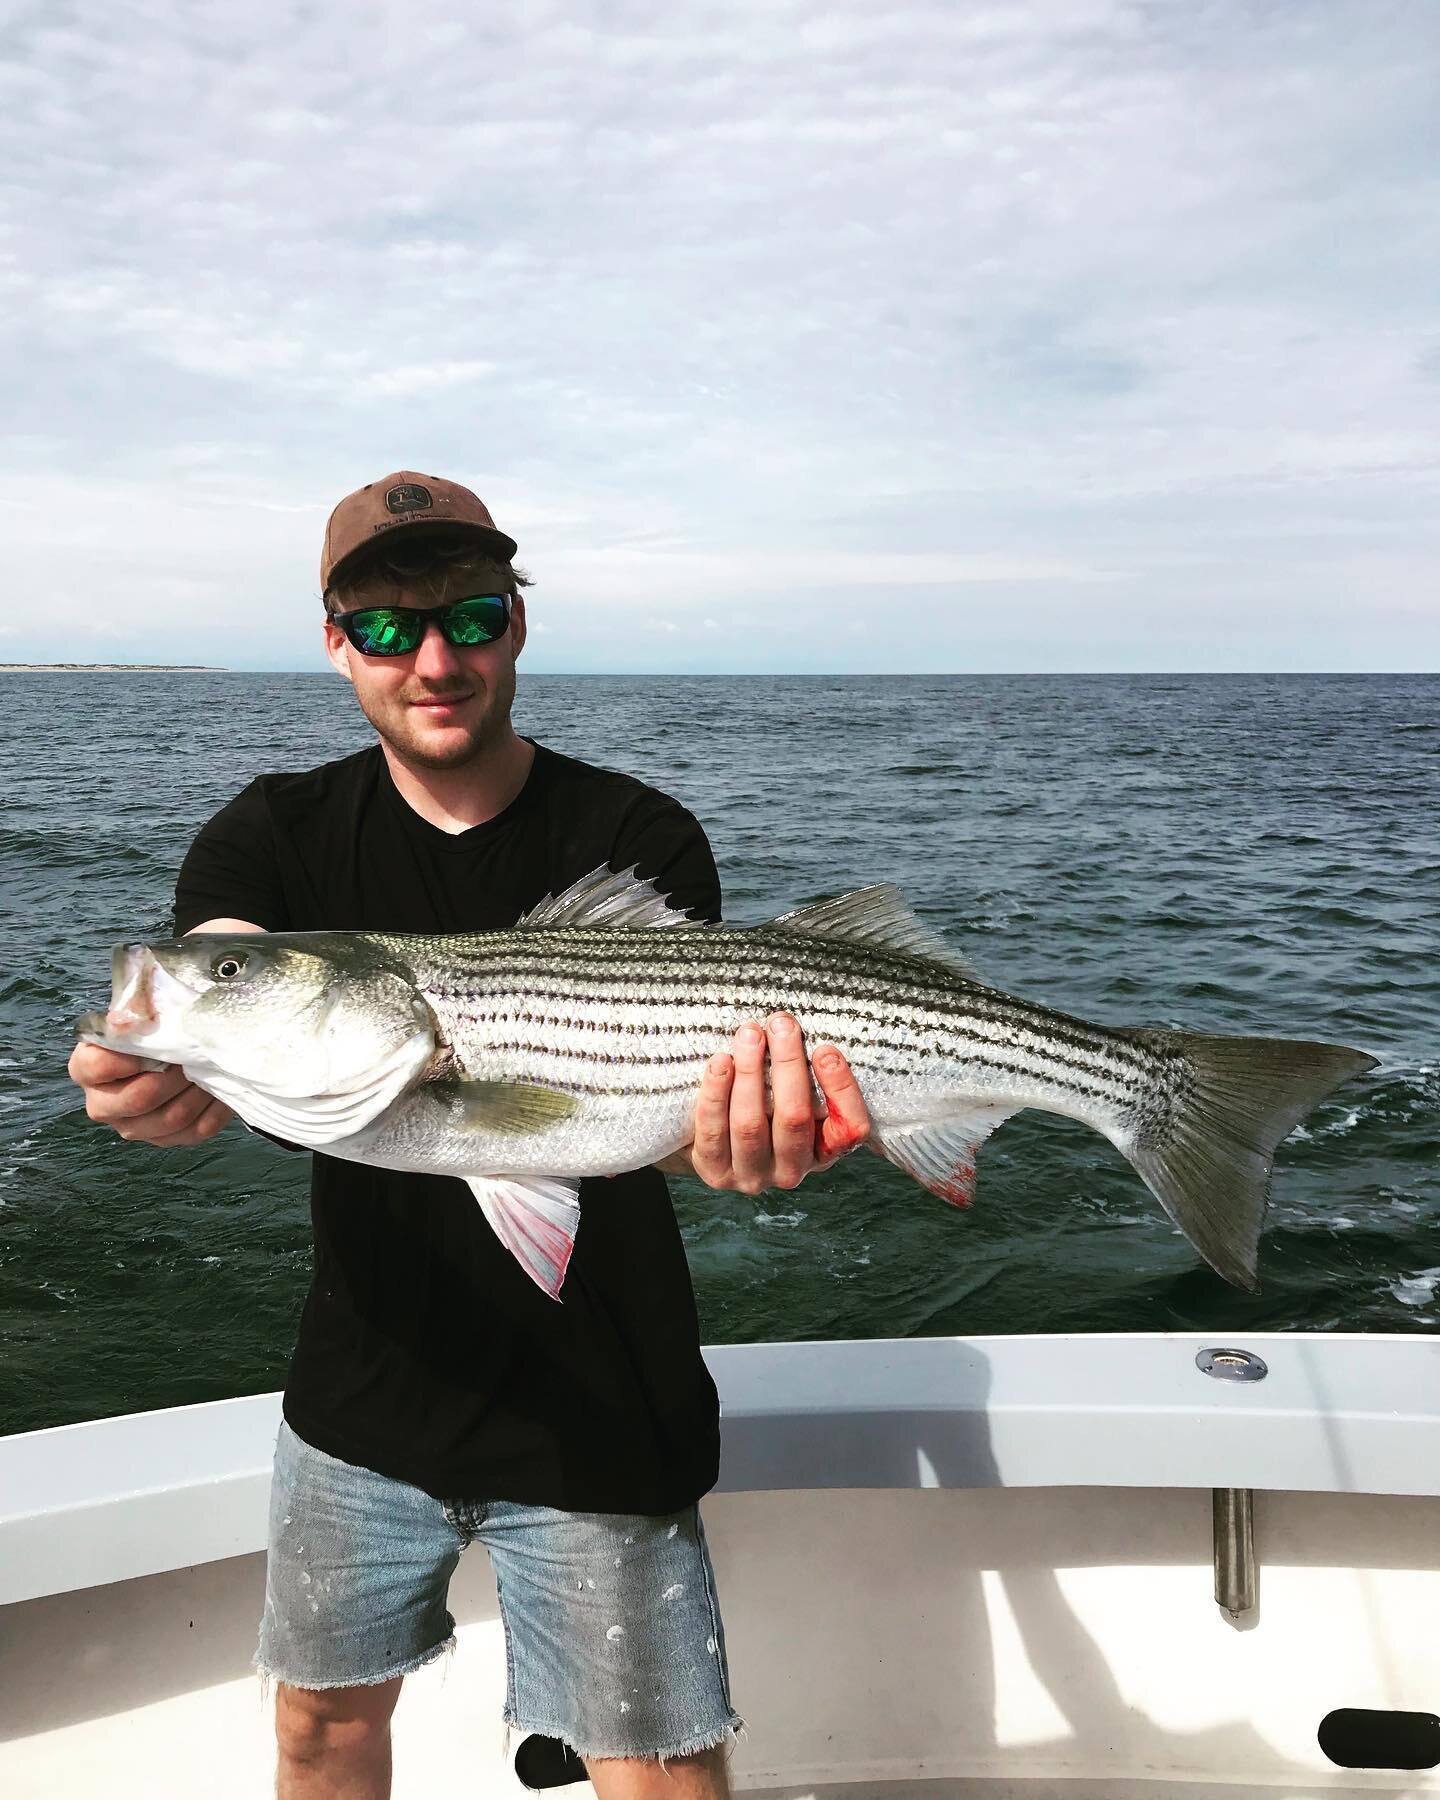 All the way from Australia and caught this nice striper and lots of blues this morning